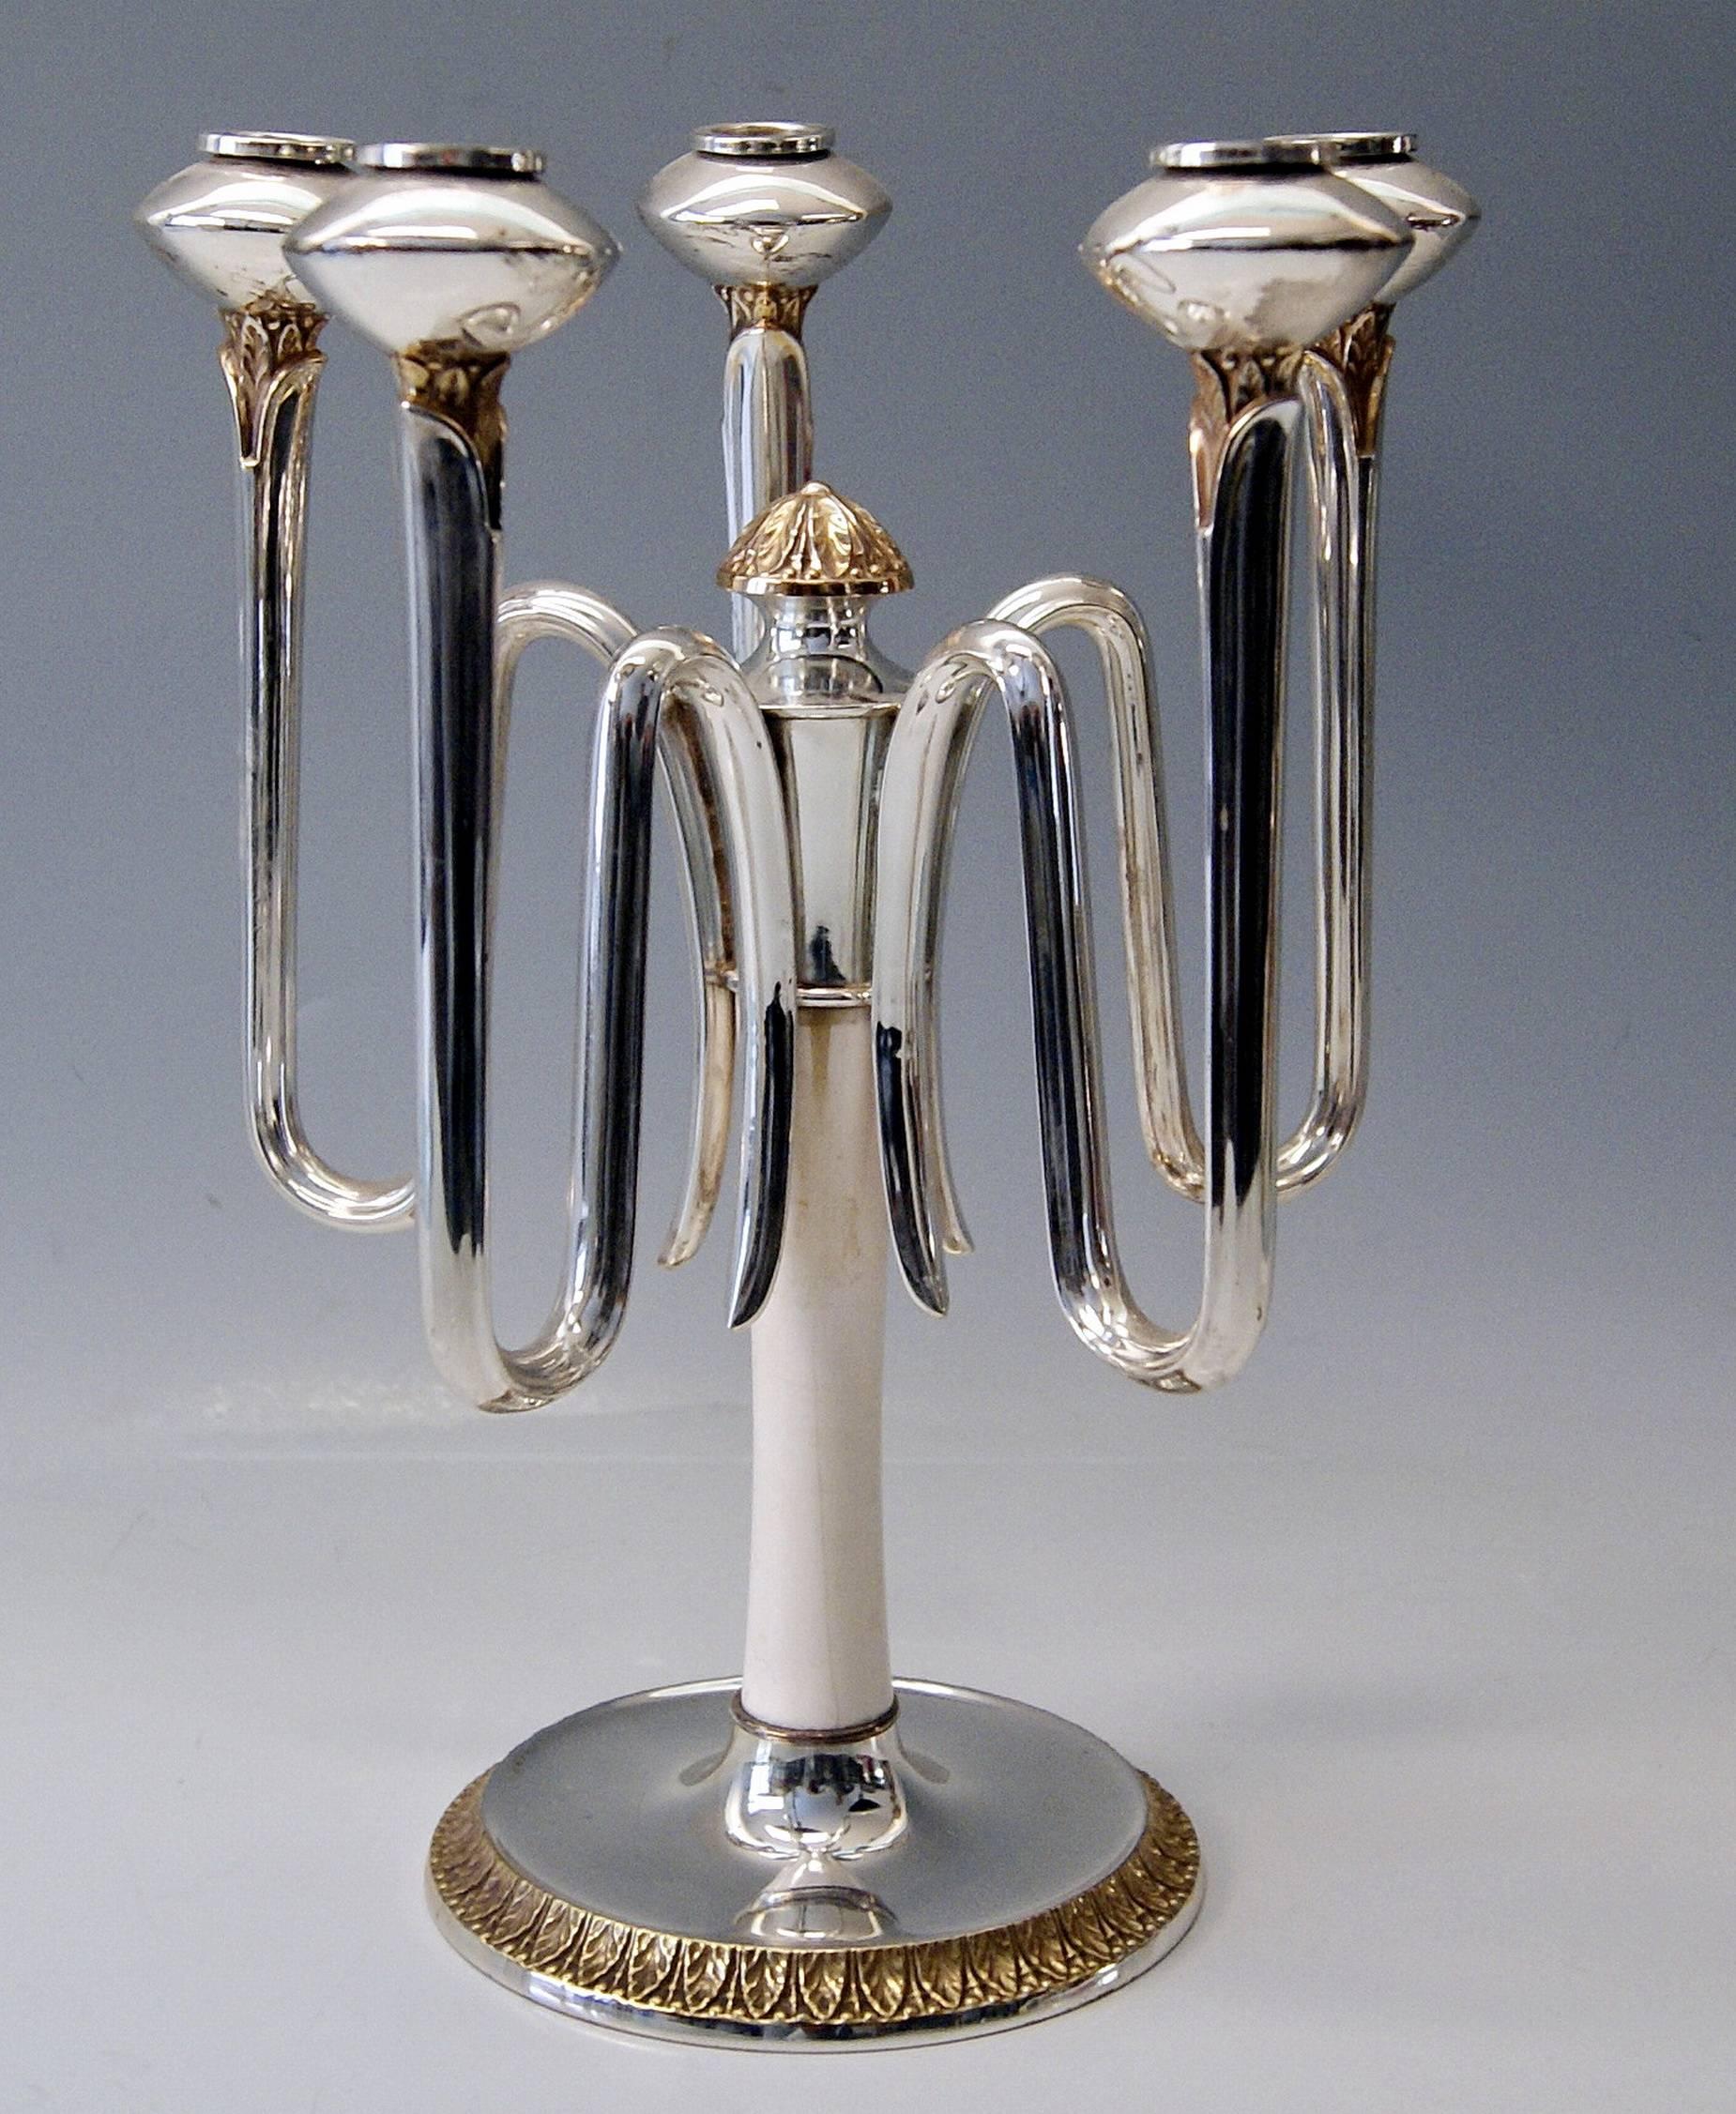 German excellent pair of Art Deco silver candleholders,
made circa 1930. 

Gorgeous Art Deco Pair of Branched Candleholders / Candelabra made circa 1930 by Otto Wolter / Schwaebisch-Gmuend  (Germany). 
These most elegant candleholders have five arms